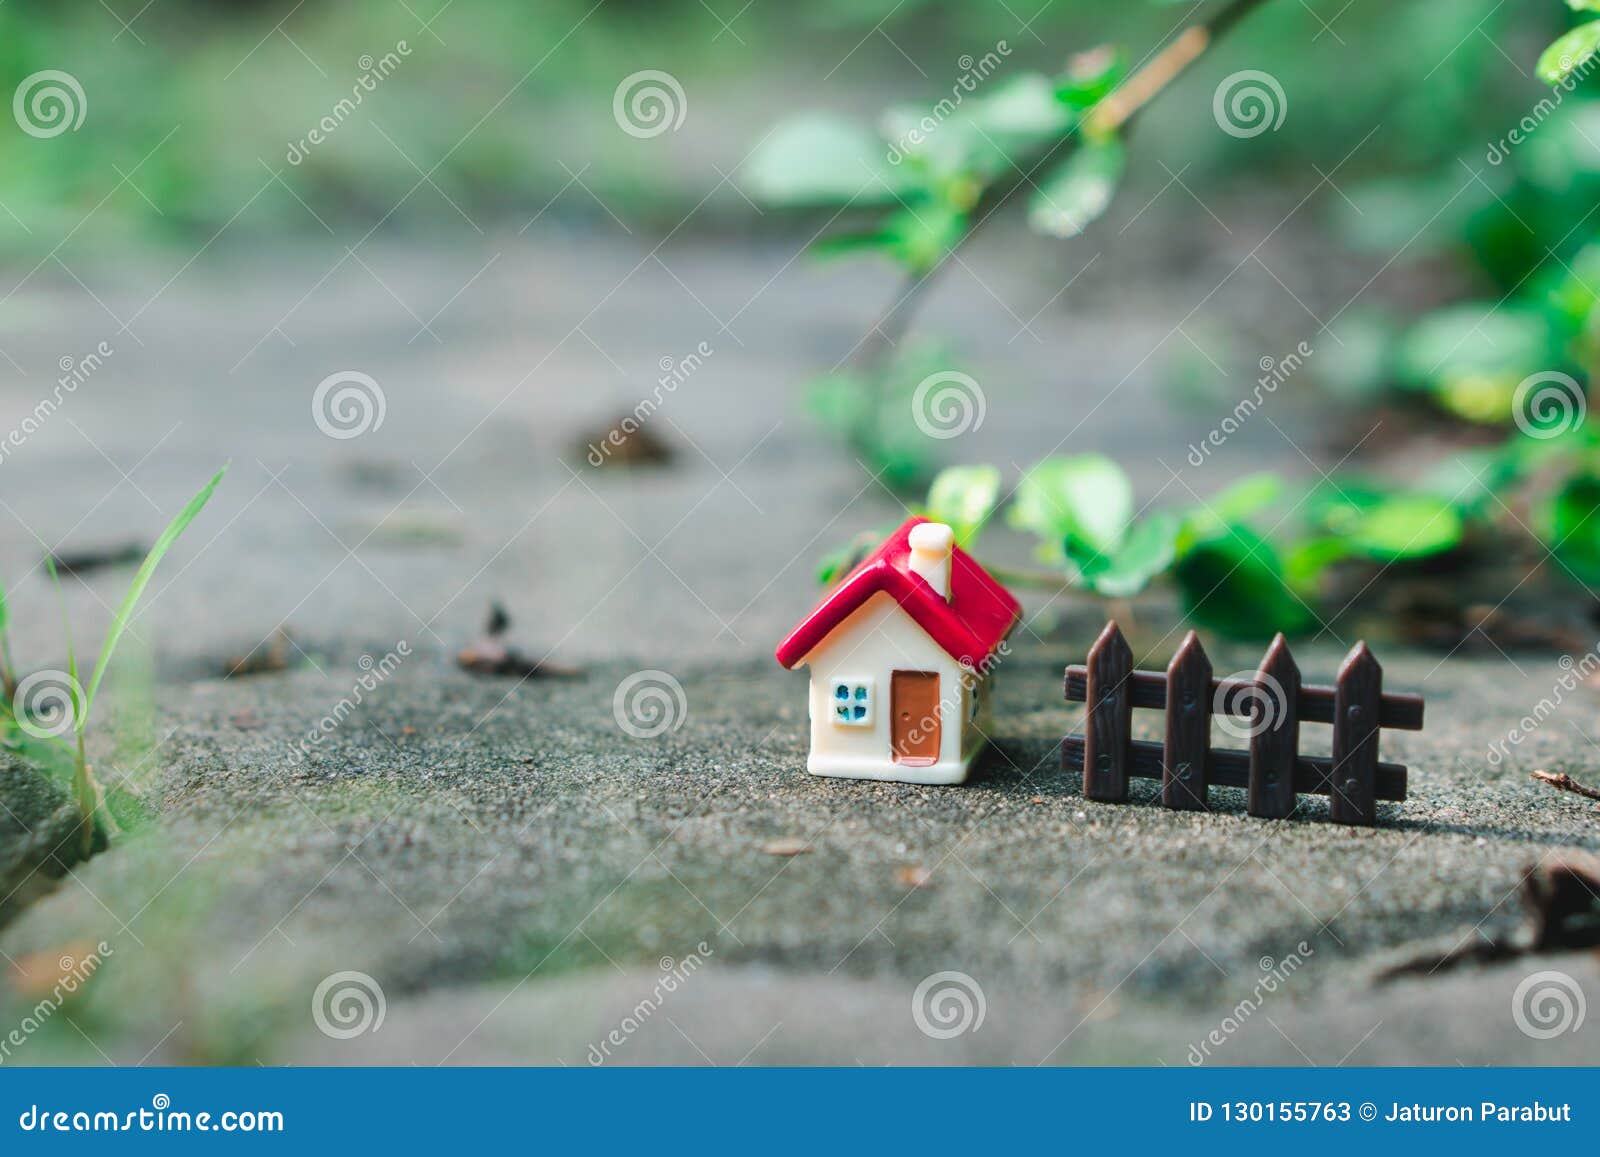 Miniature House on Nature Background Stock Image - Image of concept, grass:  130155763